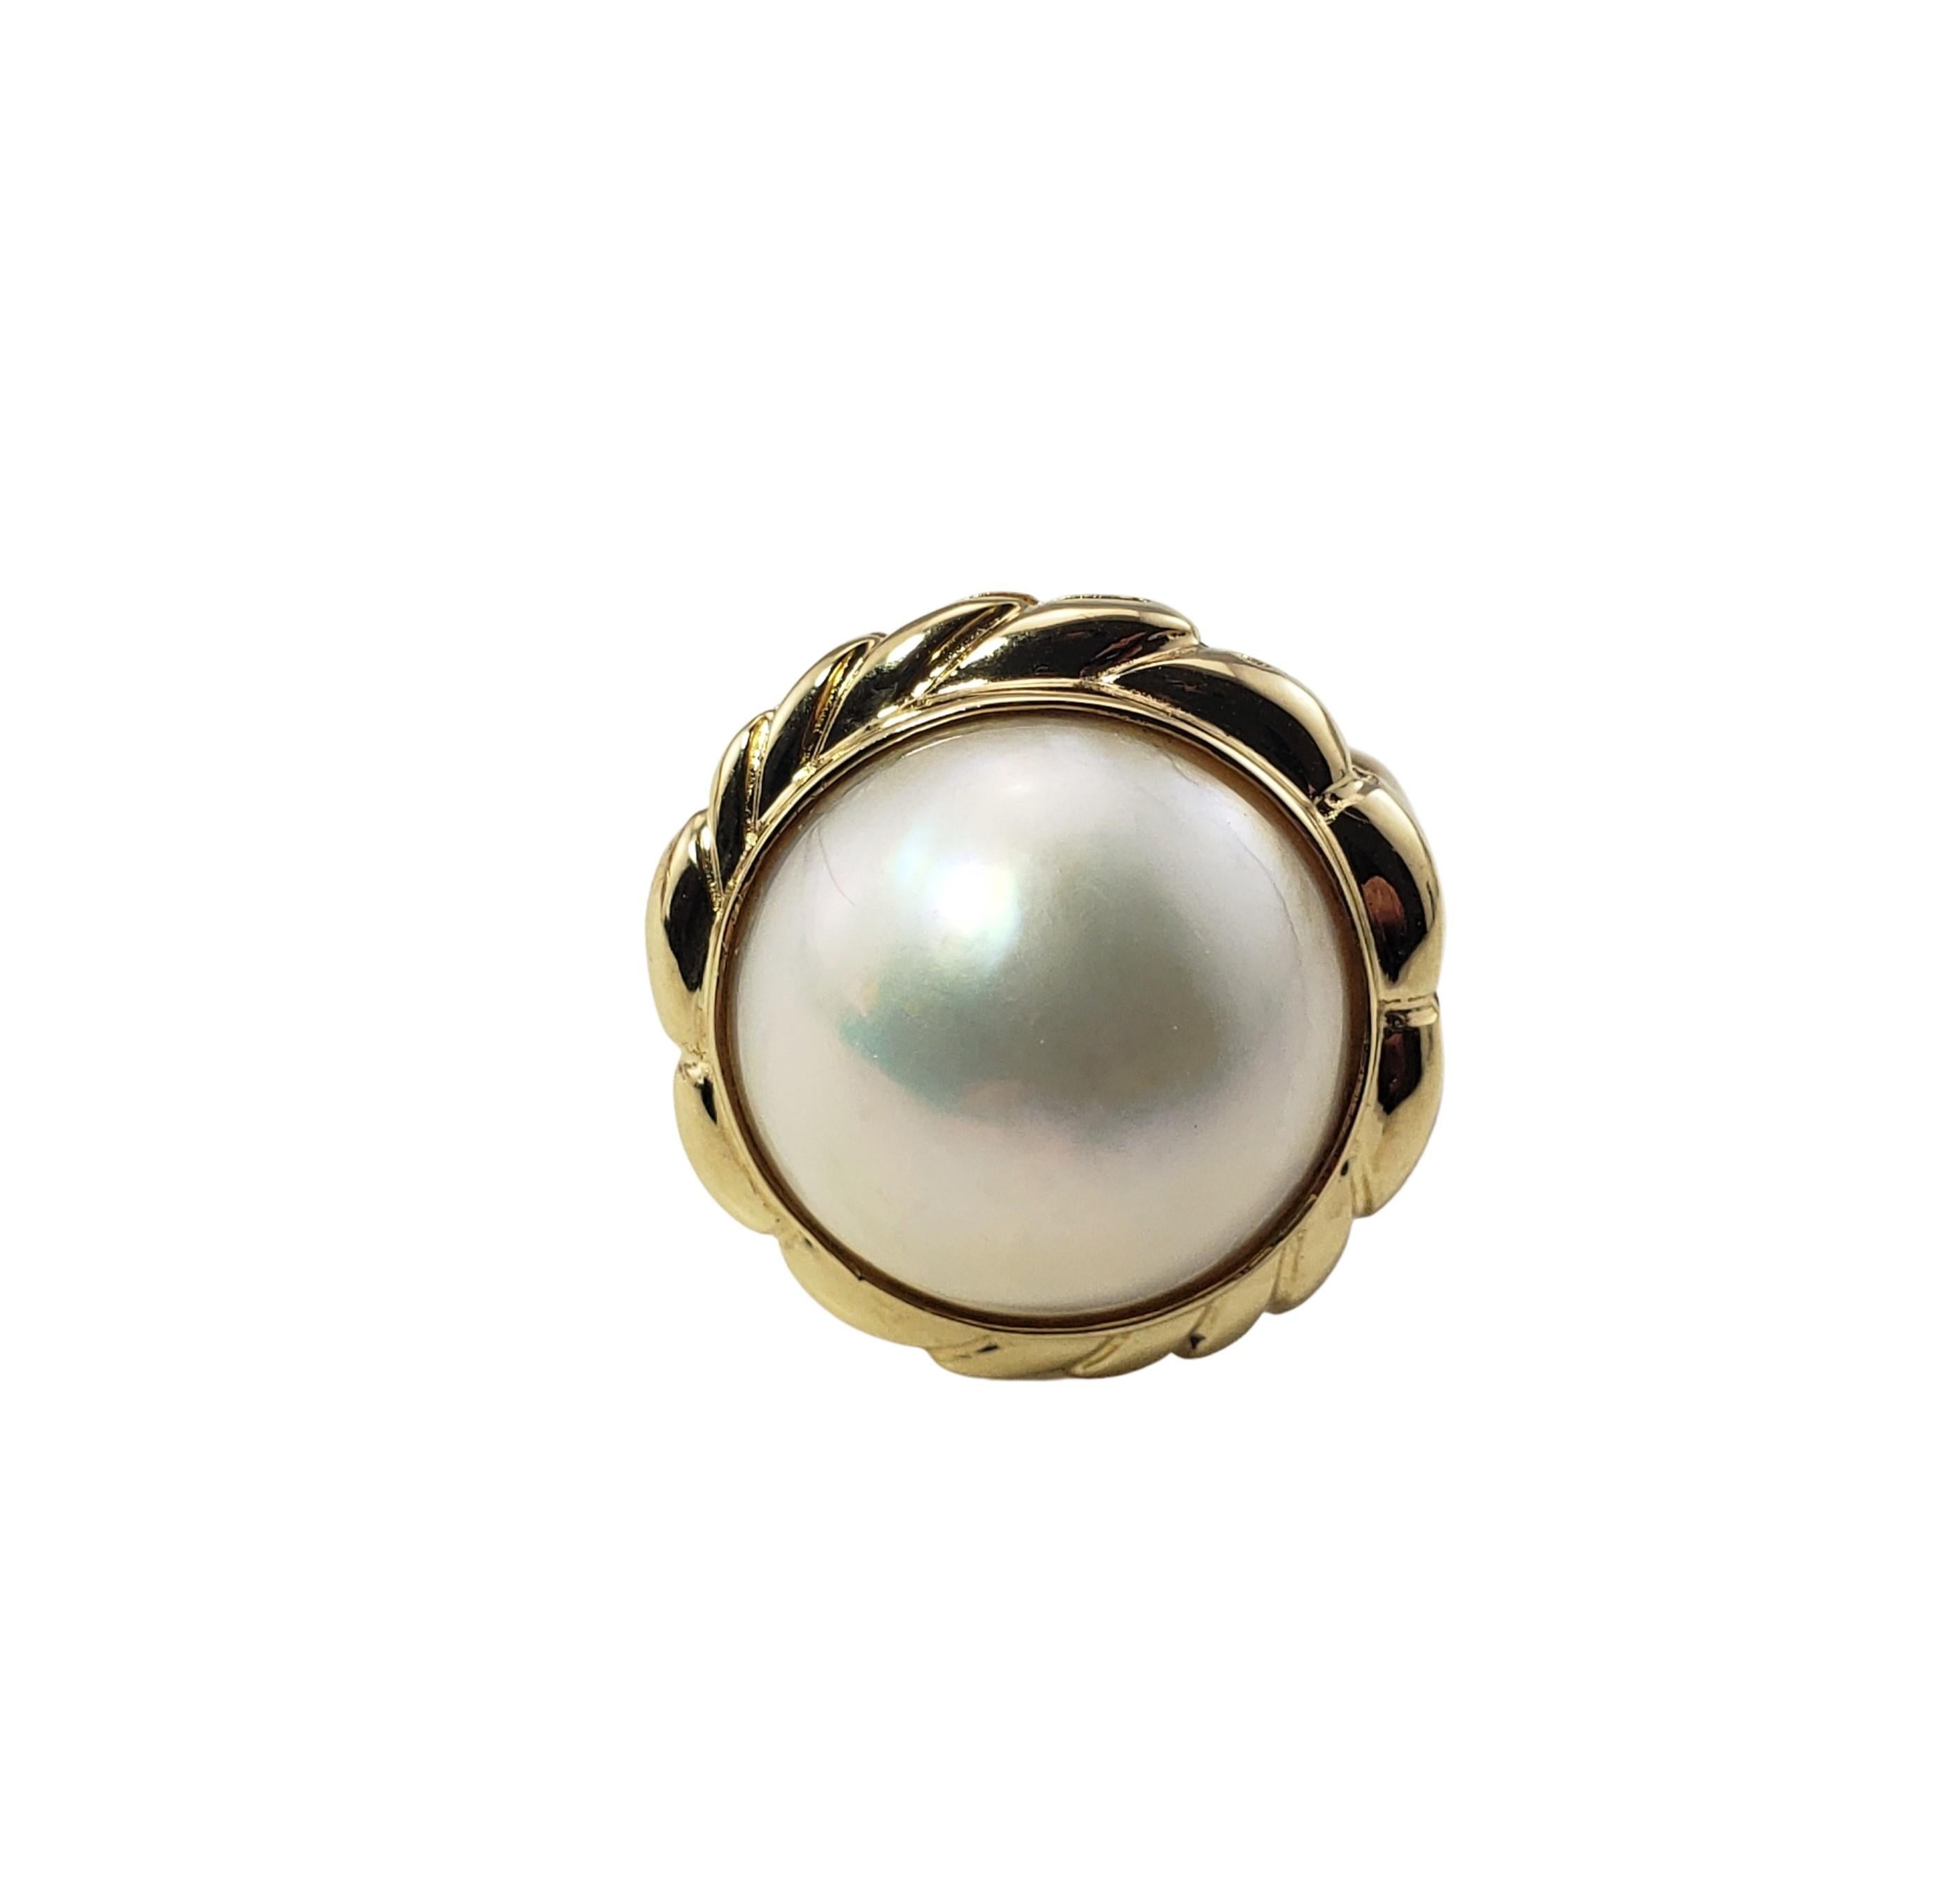 14 Karat Yellow Gold Mobe Pearl Ring Size 7-

This lovely ring features one Mobe (14 mm) set in beautifully detailed 14K yellow gold.  Width:  20 mm.  Shank:  4 mm.

Size:  7

Weight:  4.5 dwt. /  7.0 gr.

Stamped: 14K

Very good condition,